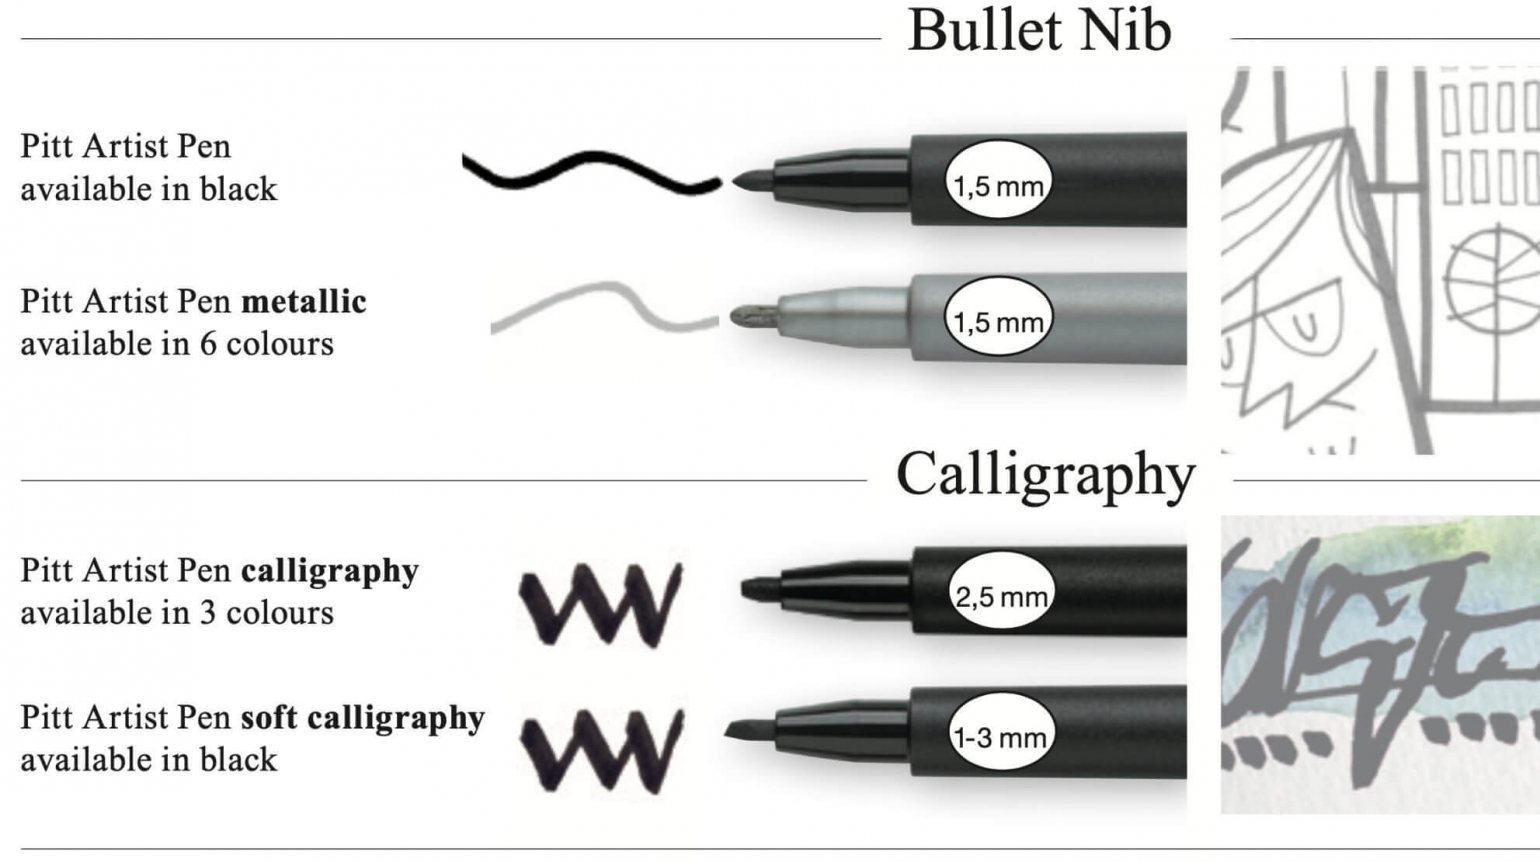 Pitt Artist Bullet and Calligraphy Pens in different thickness of nib showing stroke style